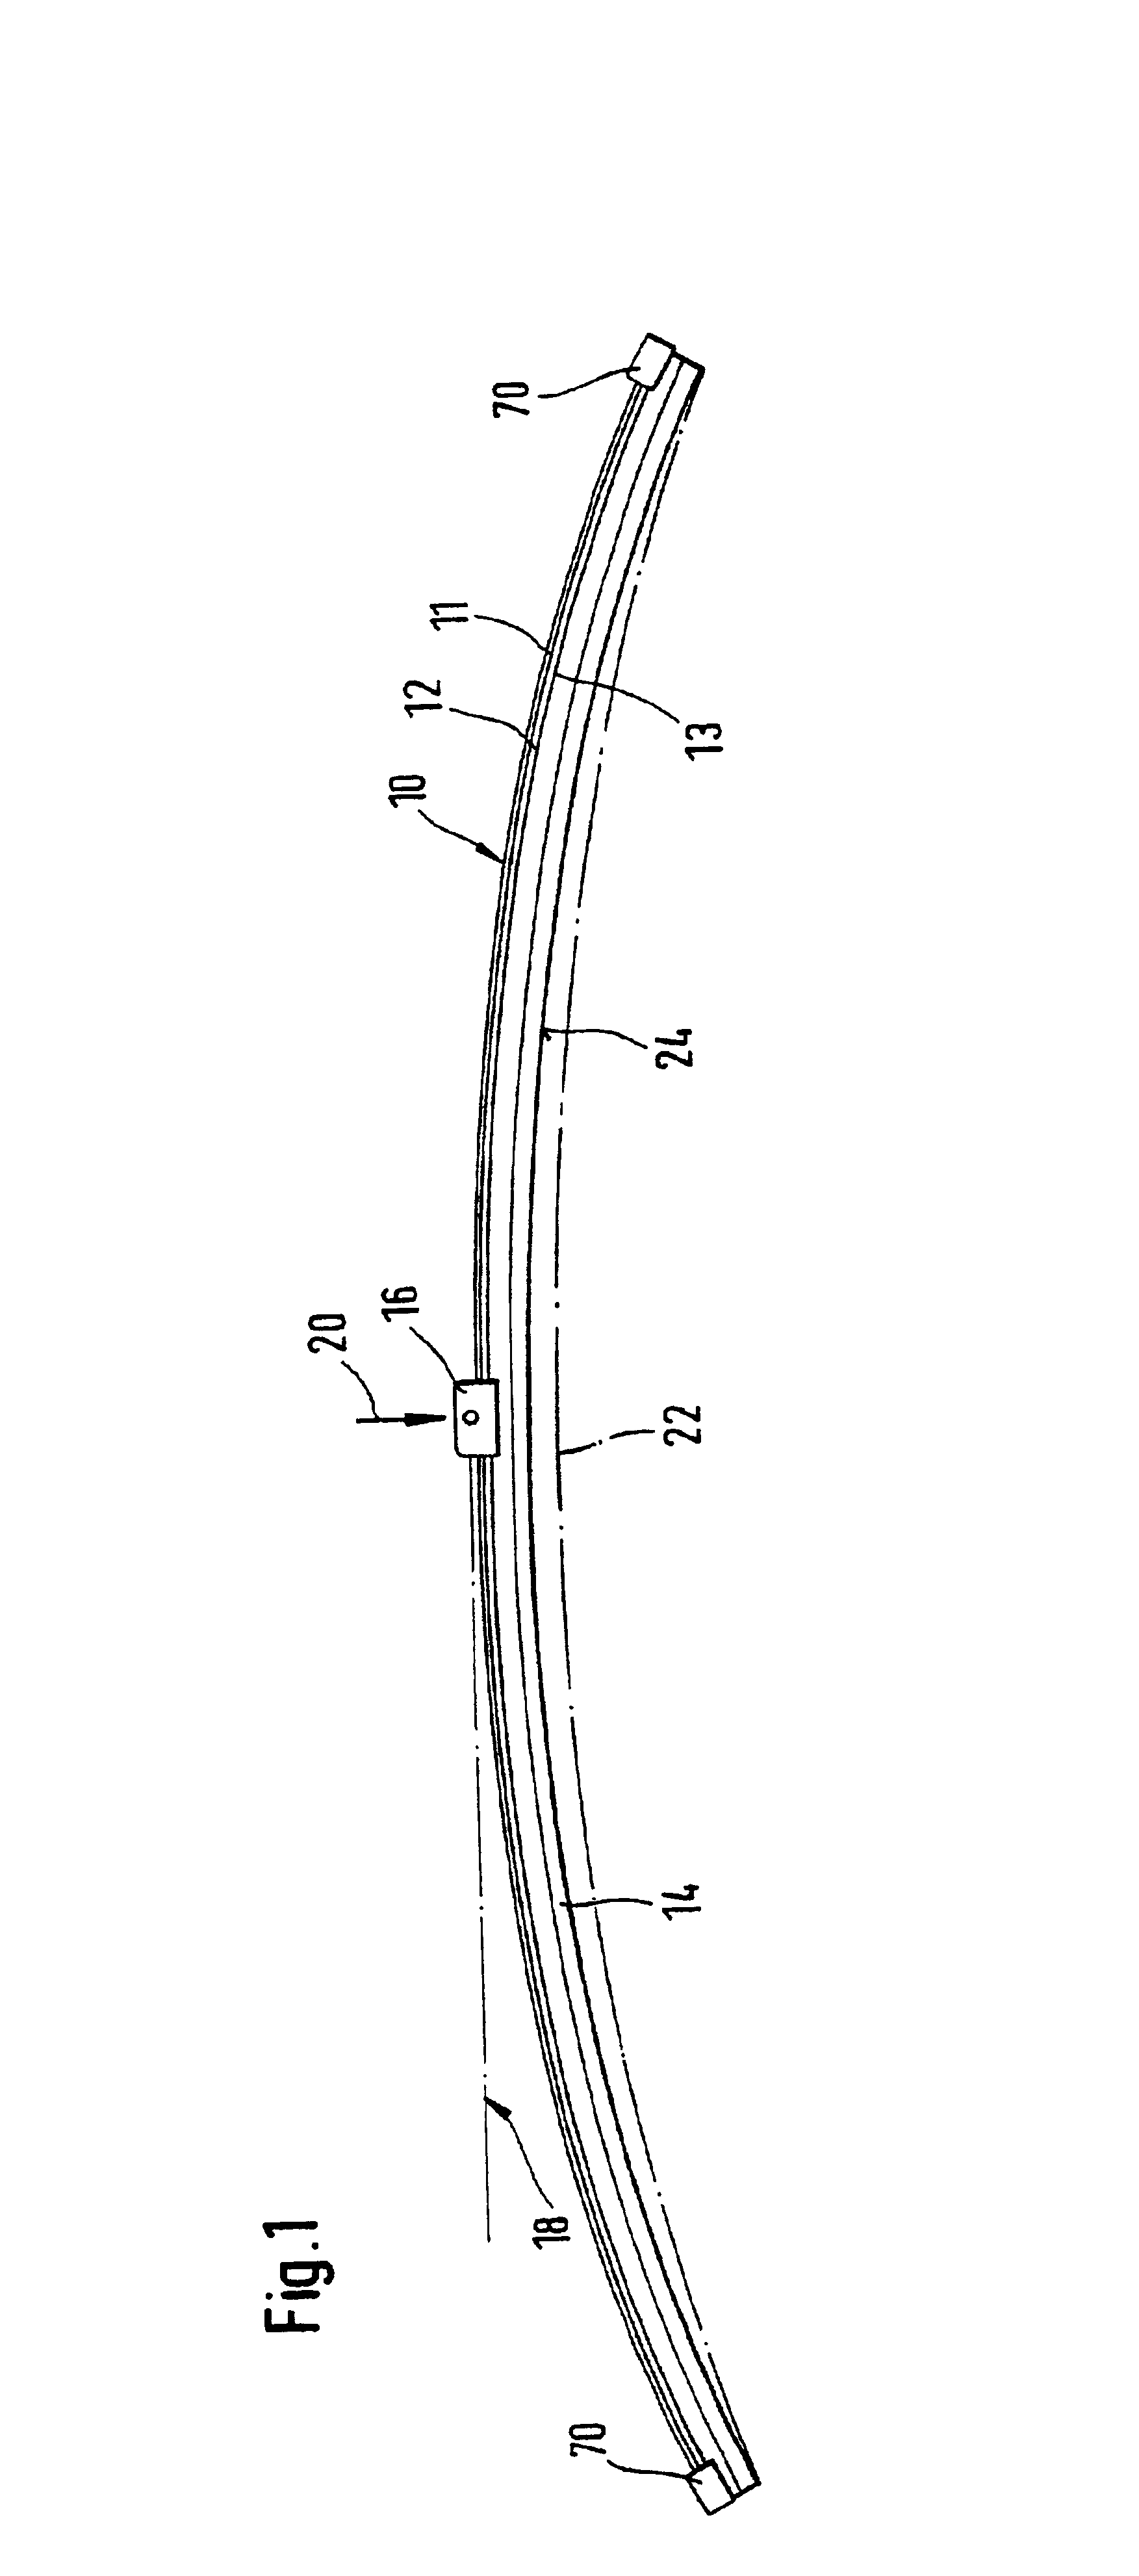 Wiper blade with wiper strip to carrier element attachment means